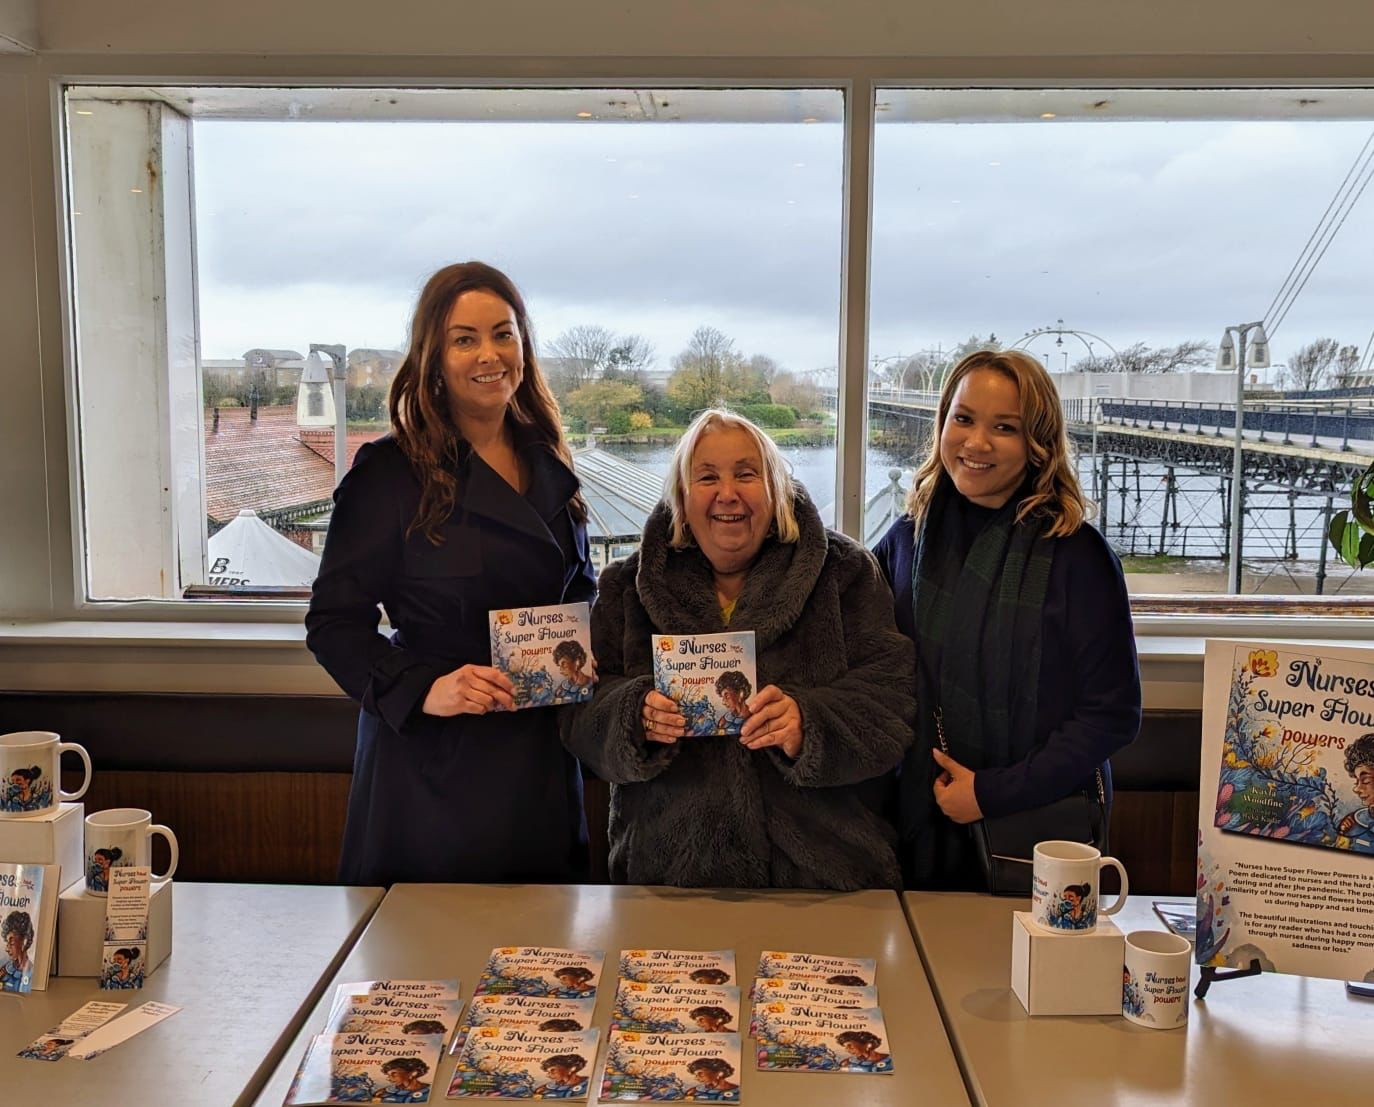 Kayla Woodfine (right) with her book Nurses Have Super Flower Powers and Silcocks Operations Manager Serena Silcock-Prince (left) and reader Leslie Nickeas (centre) at Silcocks Pier Family Restaurant